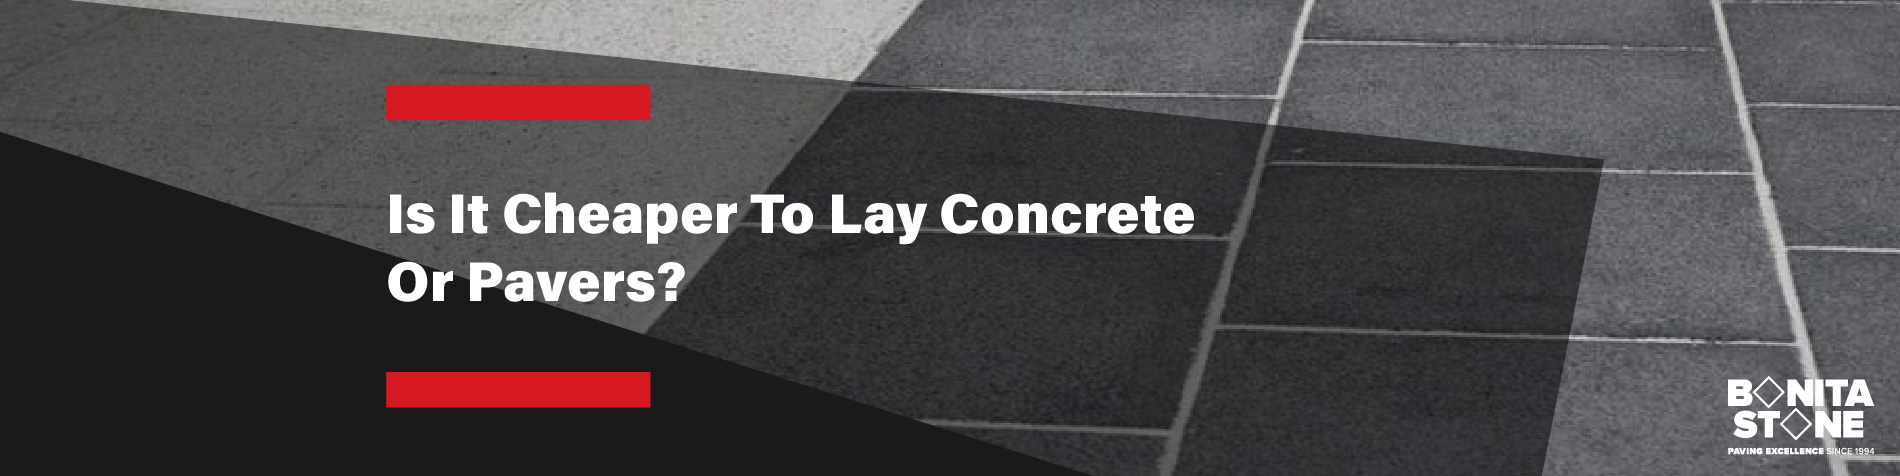 is-it-cheaper-to-lay-concrete-or-pavers-banner